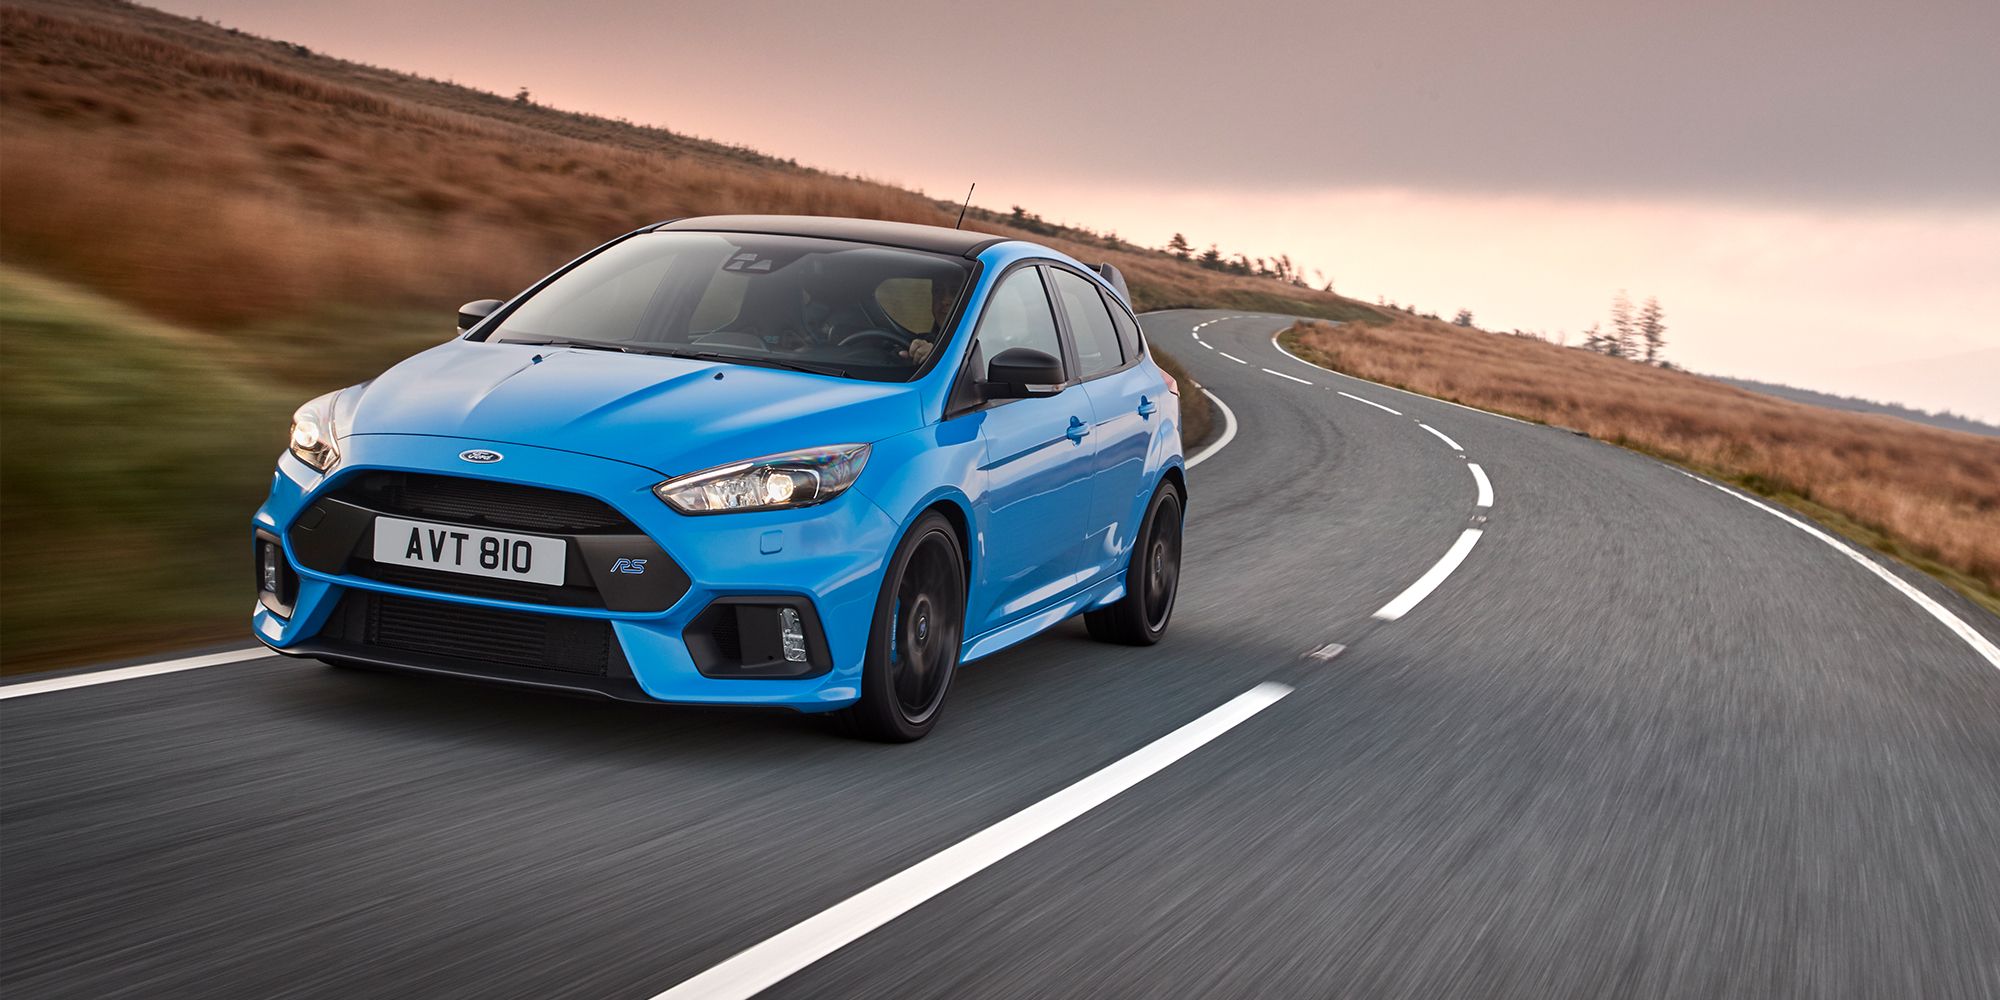 The front of the Mk3 Focus RS